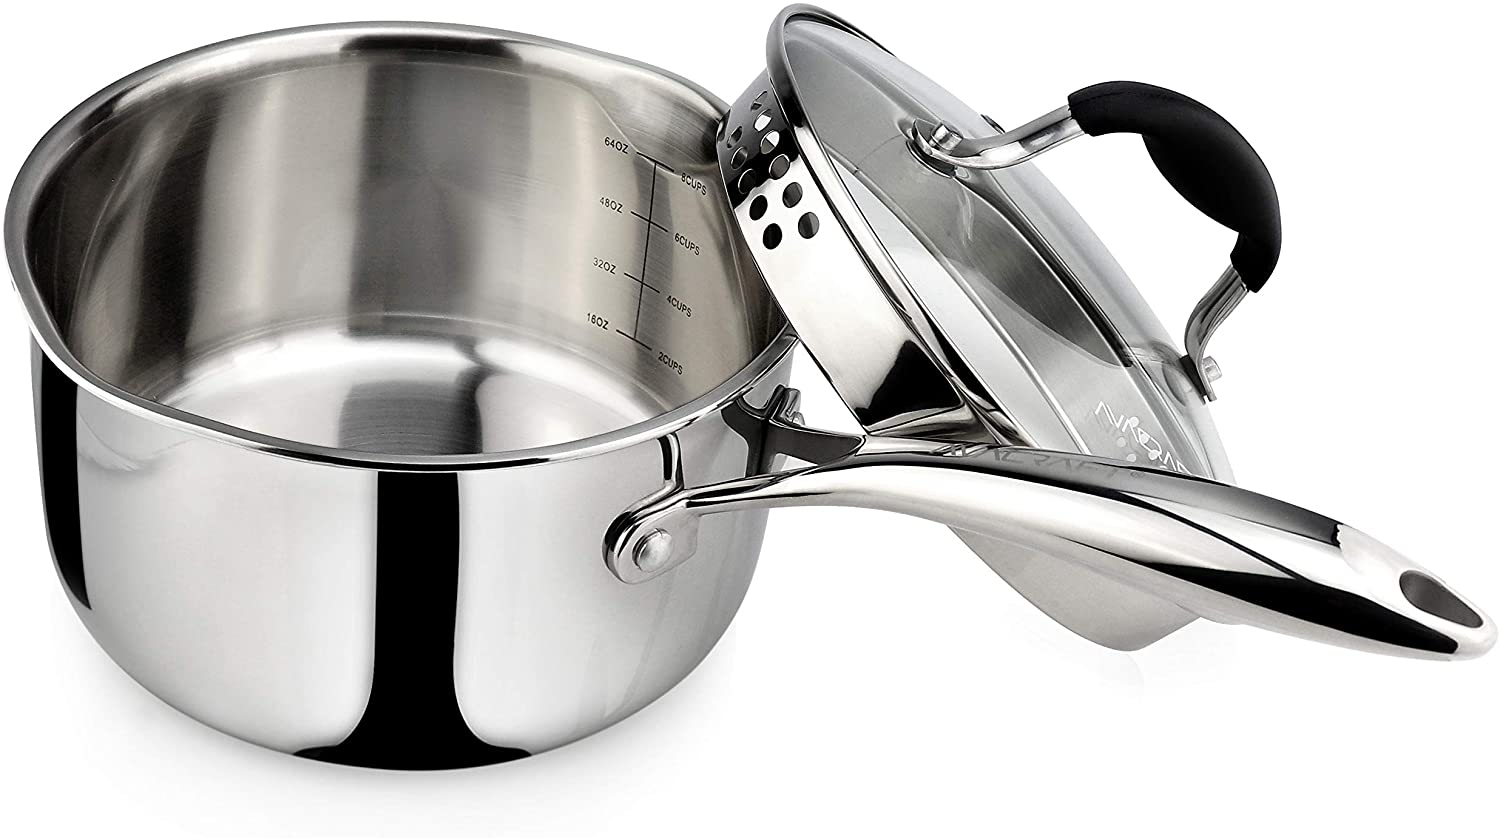 AVACRAFT Top Rated Tri-Ply Stainless Steel Saucepan with Glass Strainer Lid, Two Side Spouts, Ergonomic Handle (Tri-Ply Full Body, 2.5 Quart)